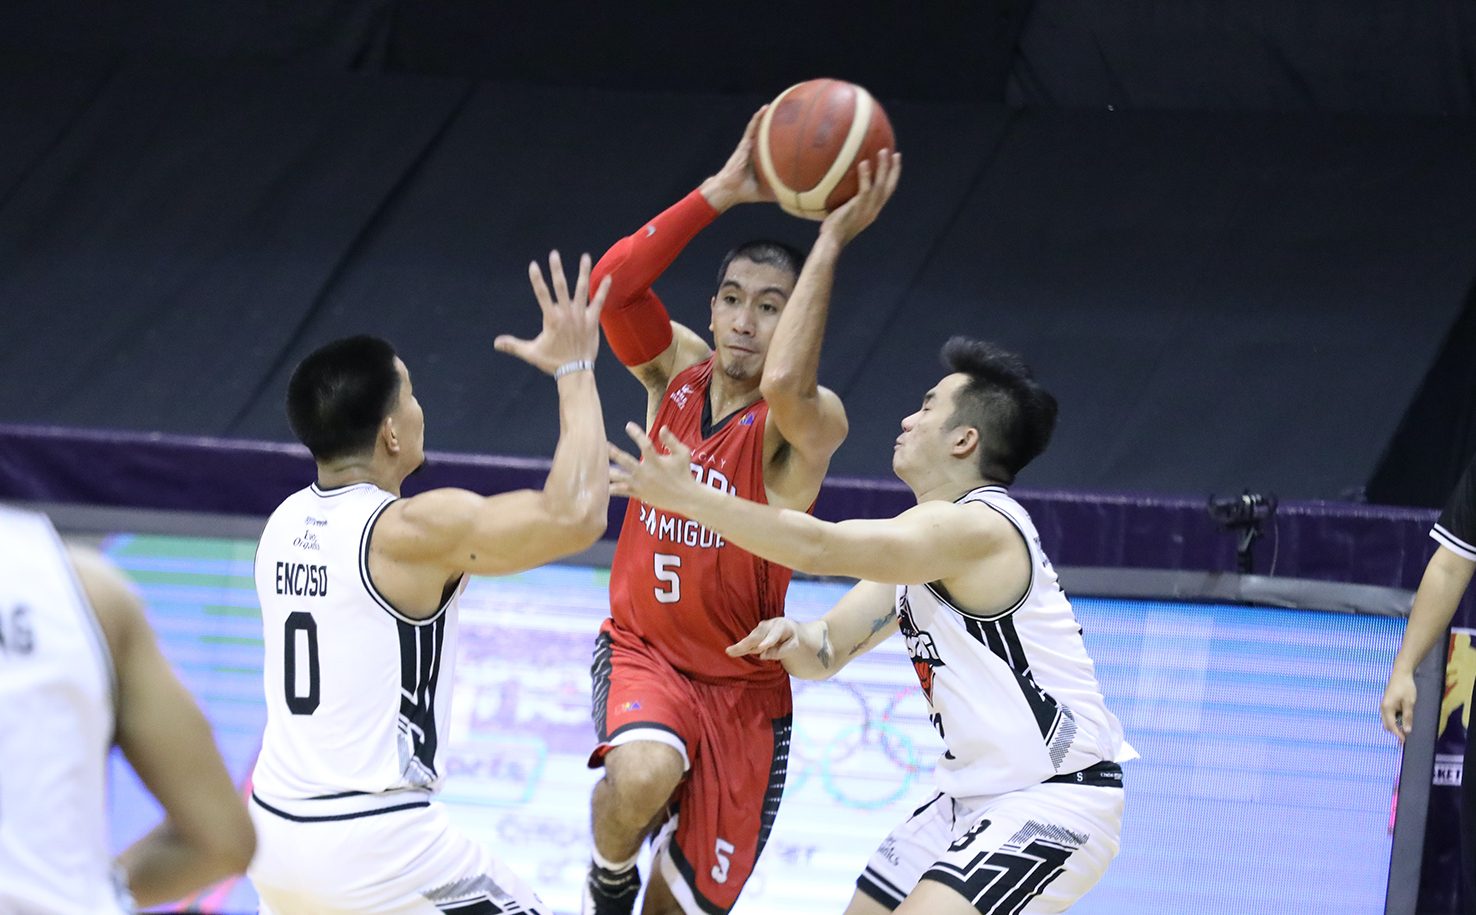 PBA eyeing to continue season in Batangas as NCR shifts to ECQ